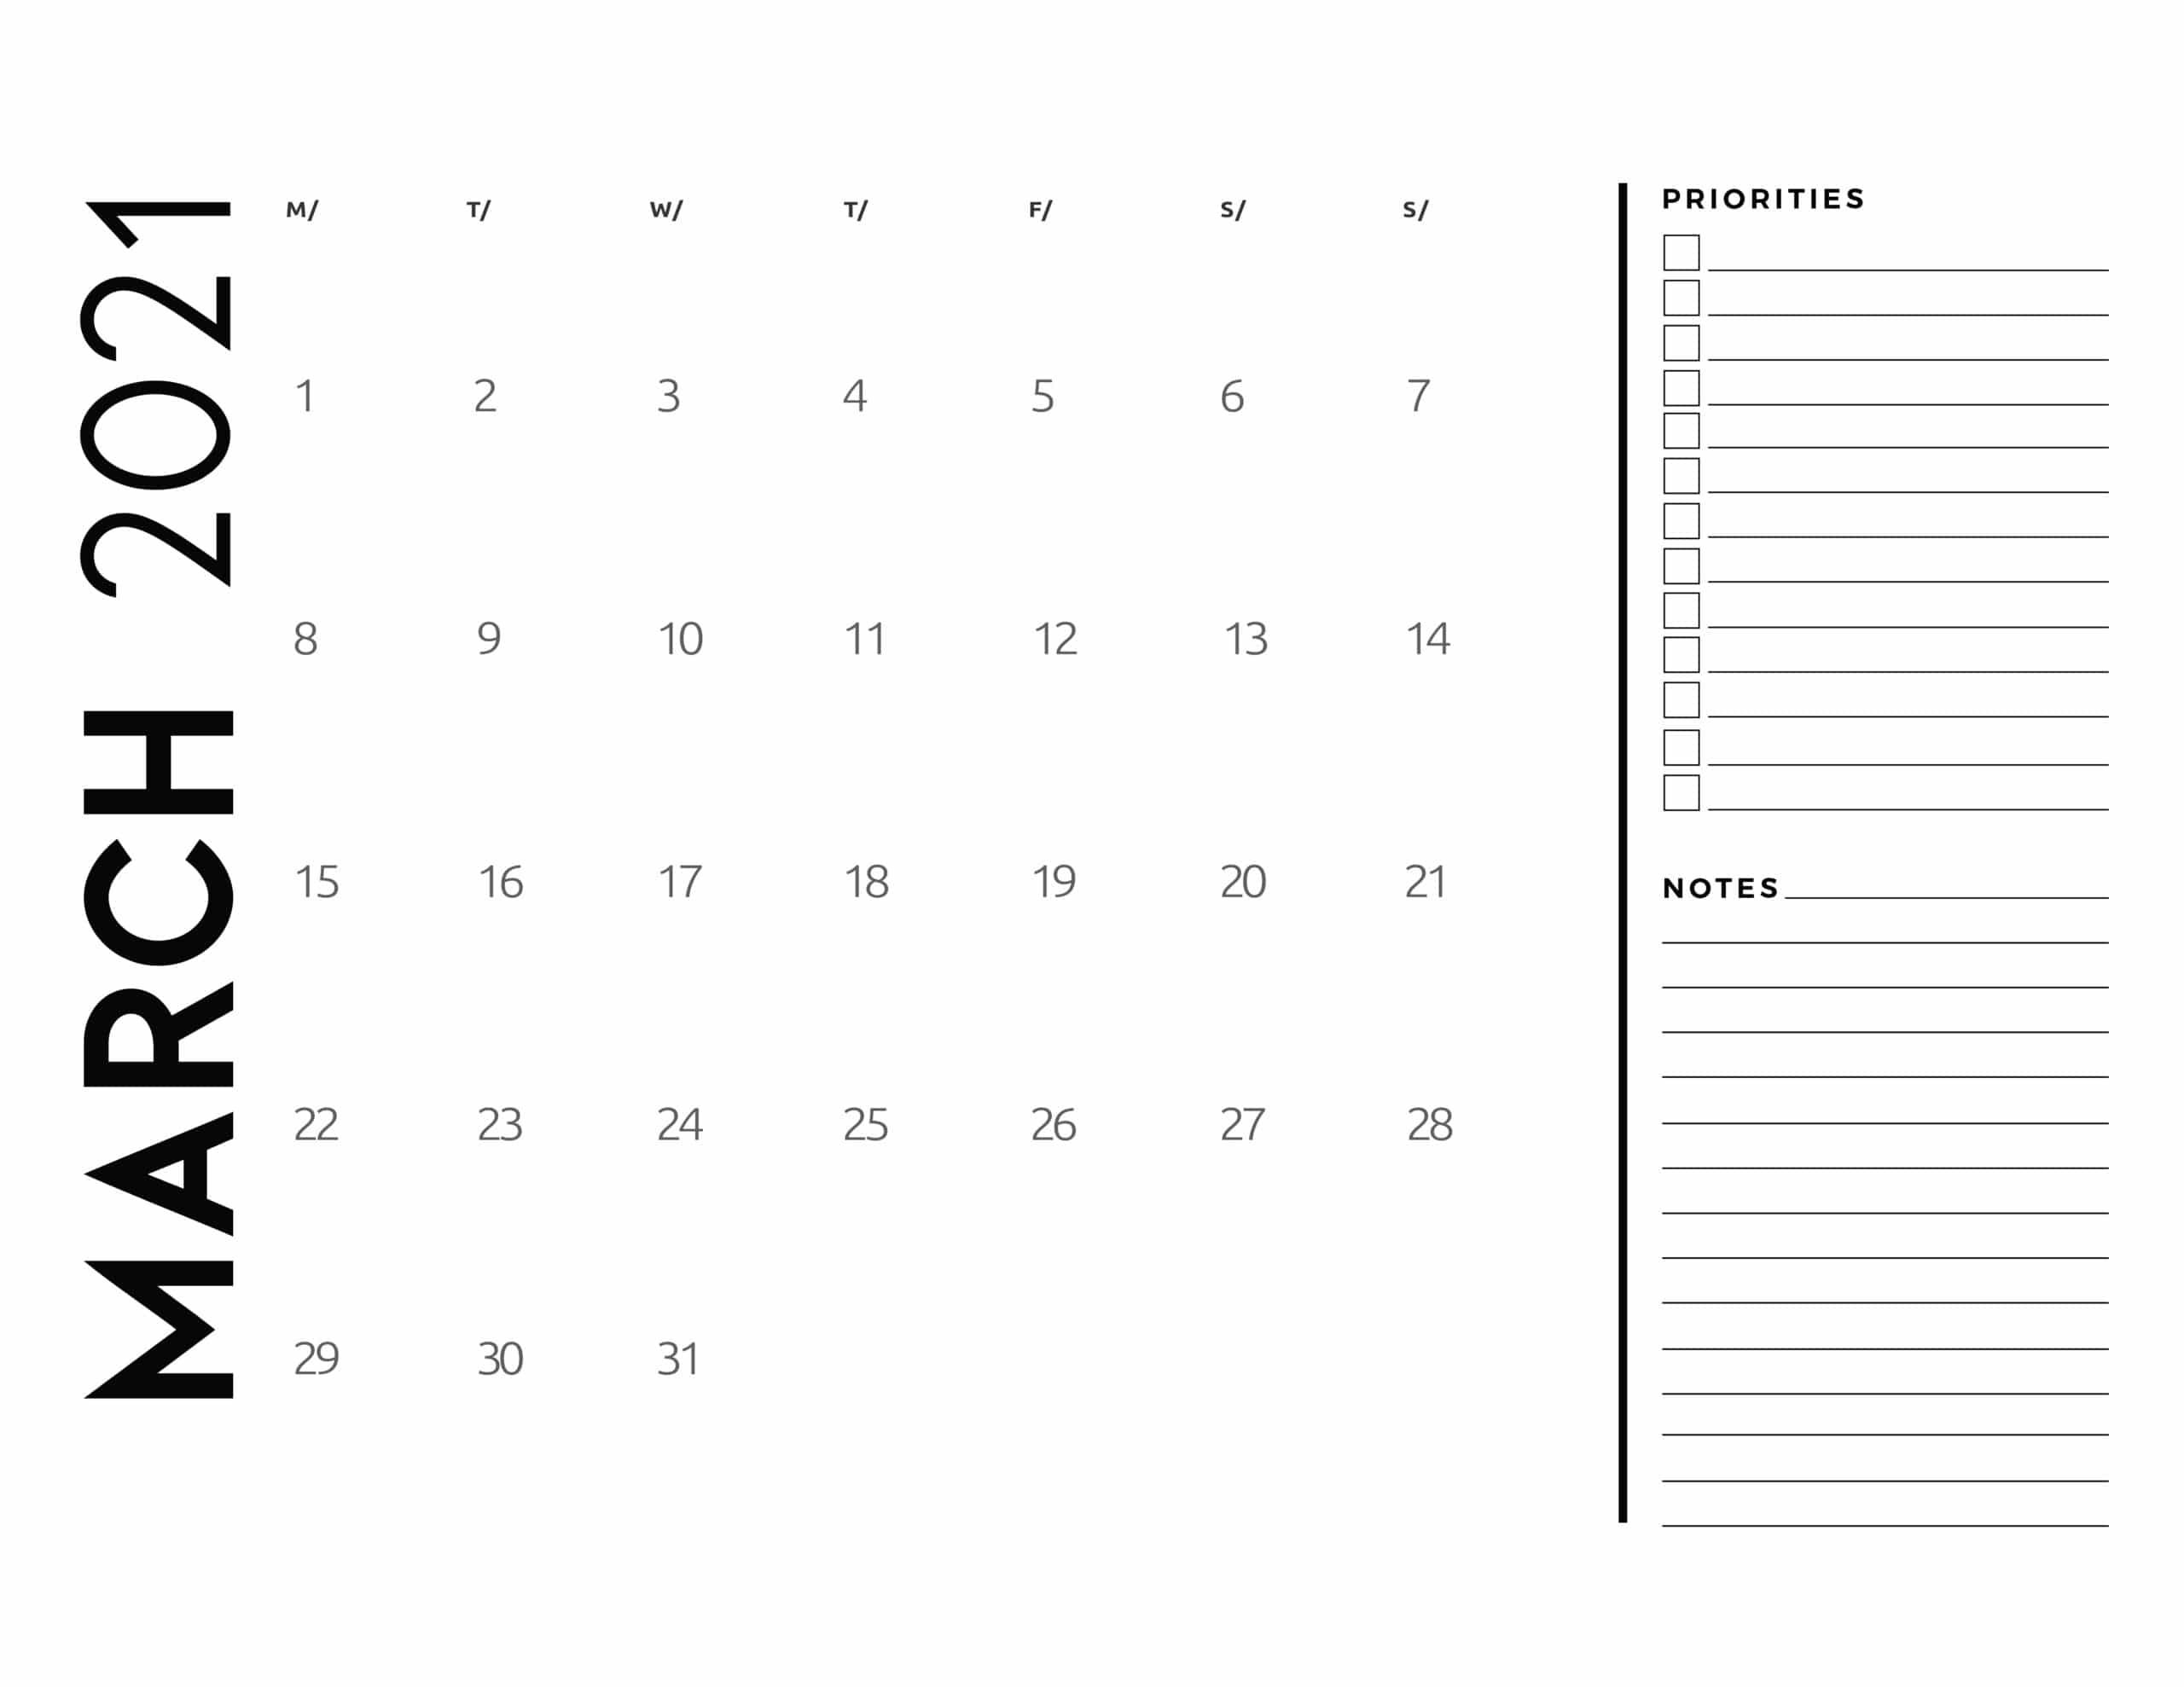 Free 2021 Calendar Priorities And Notes World Of Printables